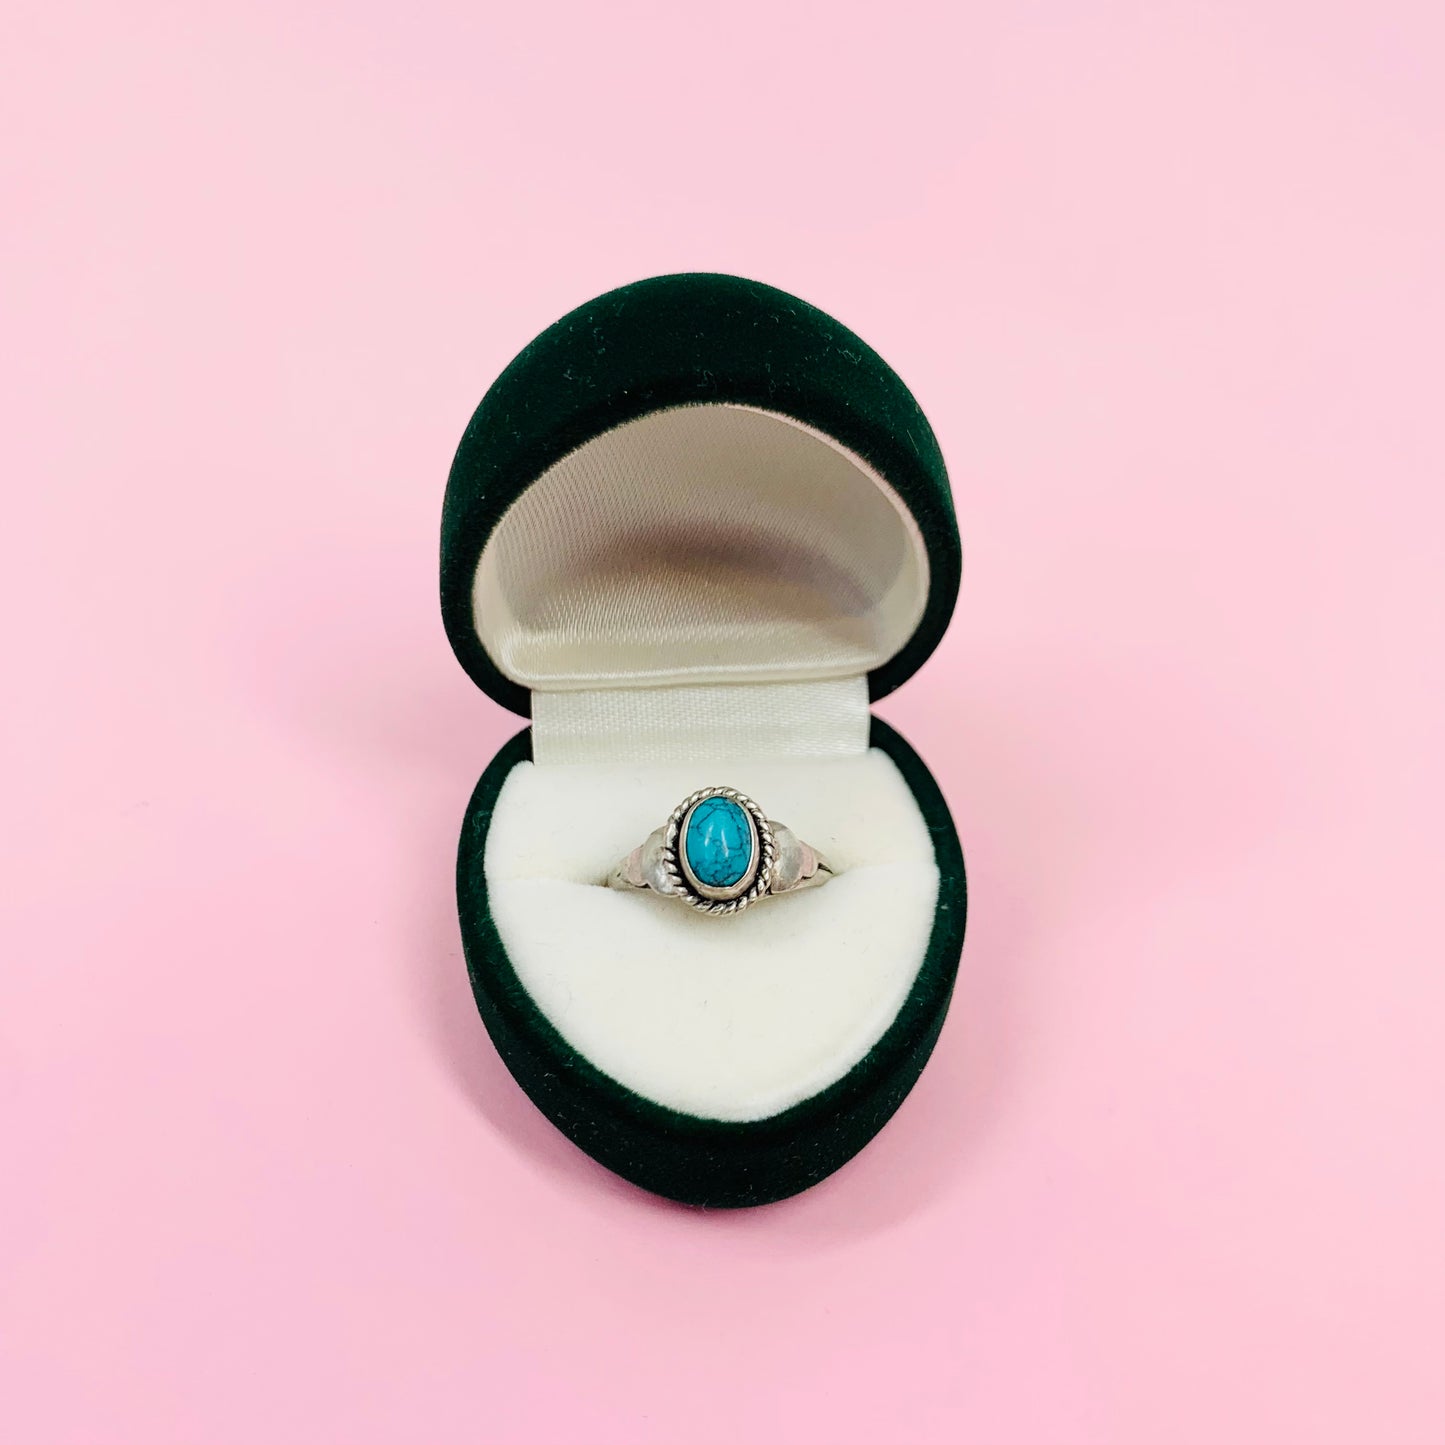 Midcentury silver ring with turquoise center stone